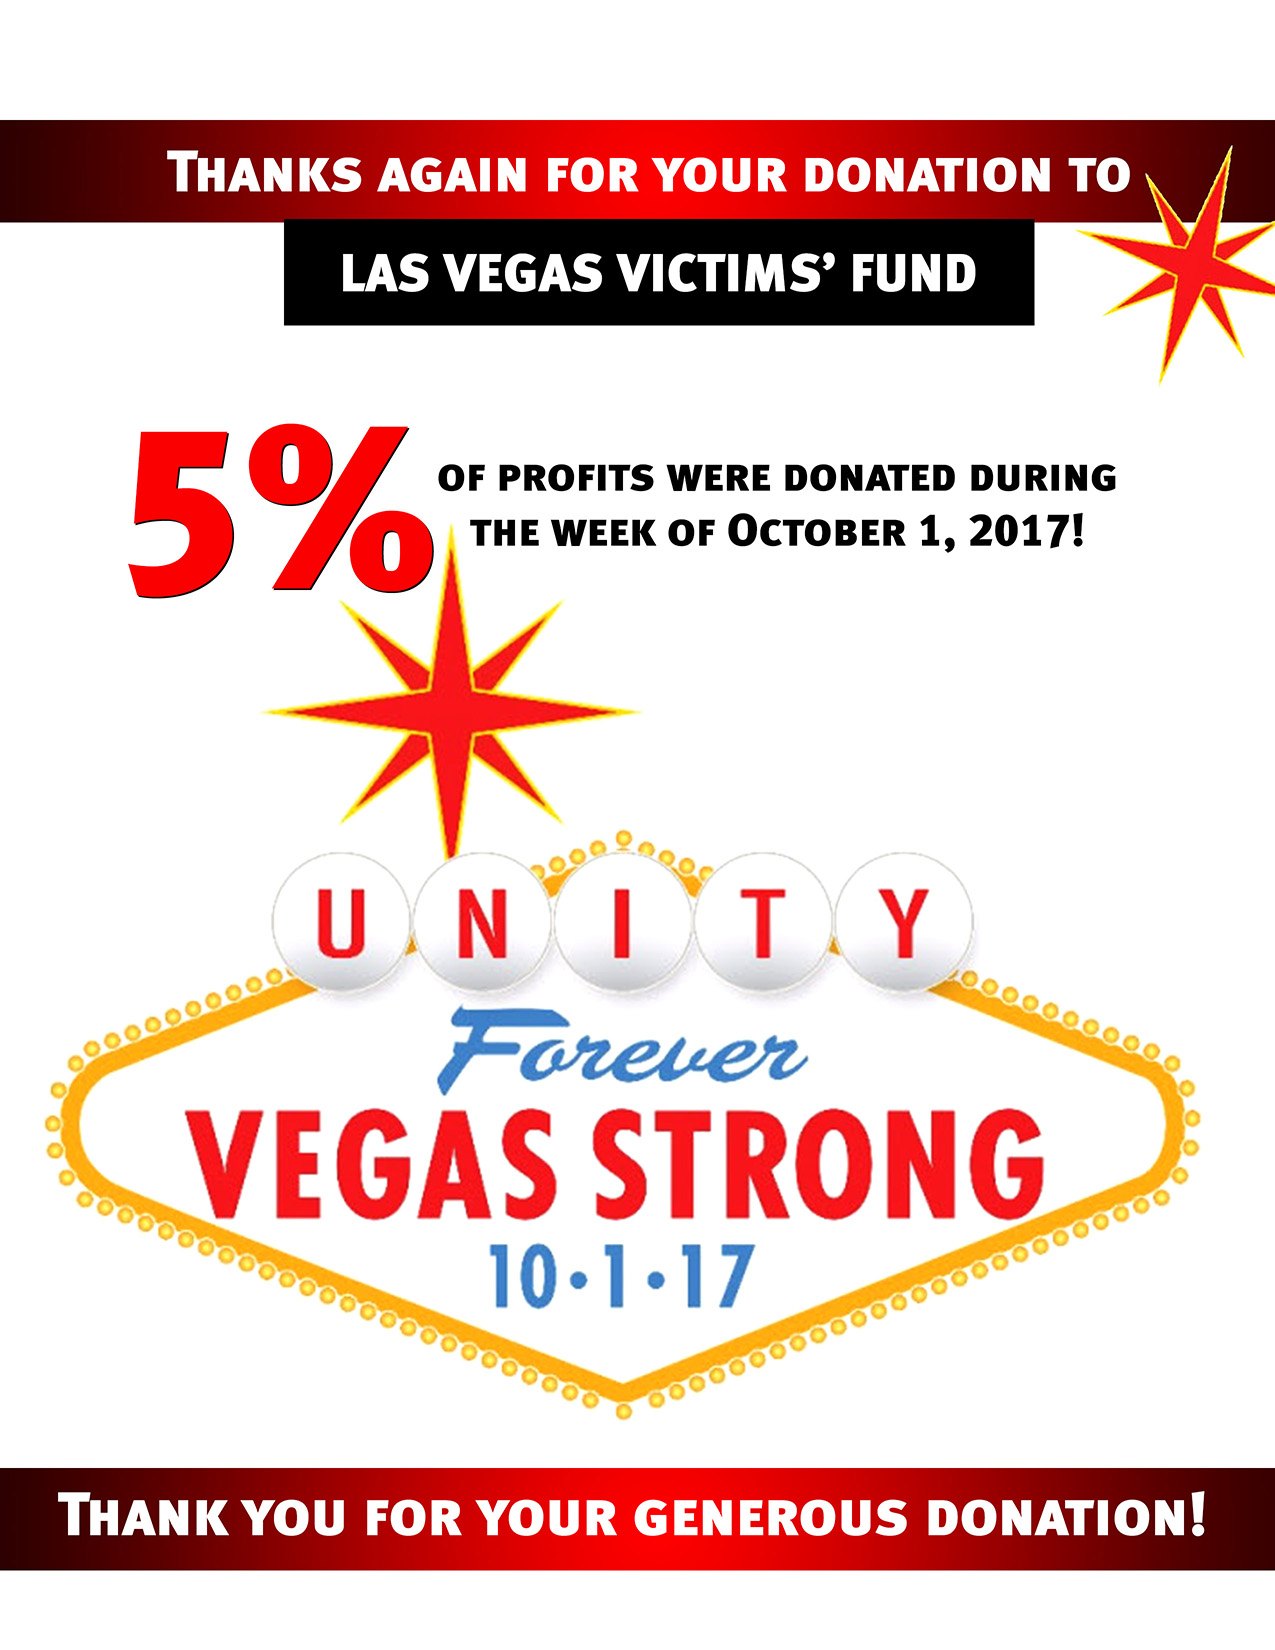 Thank You So Much For Your Donation To The Las Vegas Victims’ Fund!